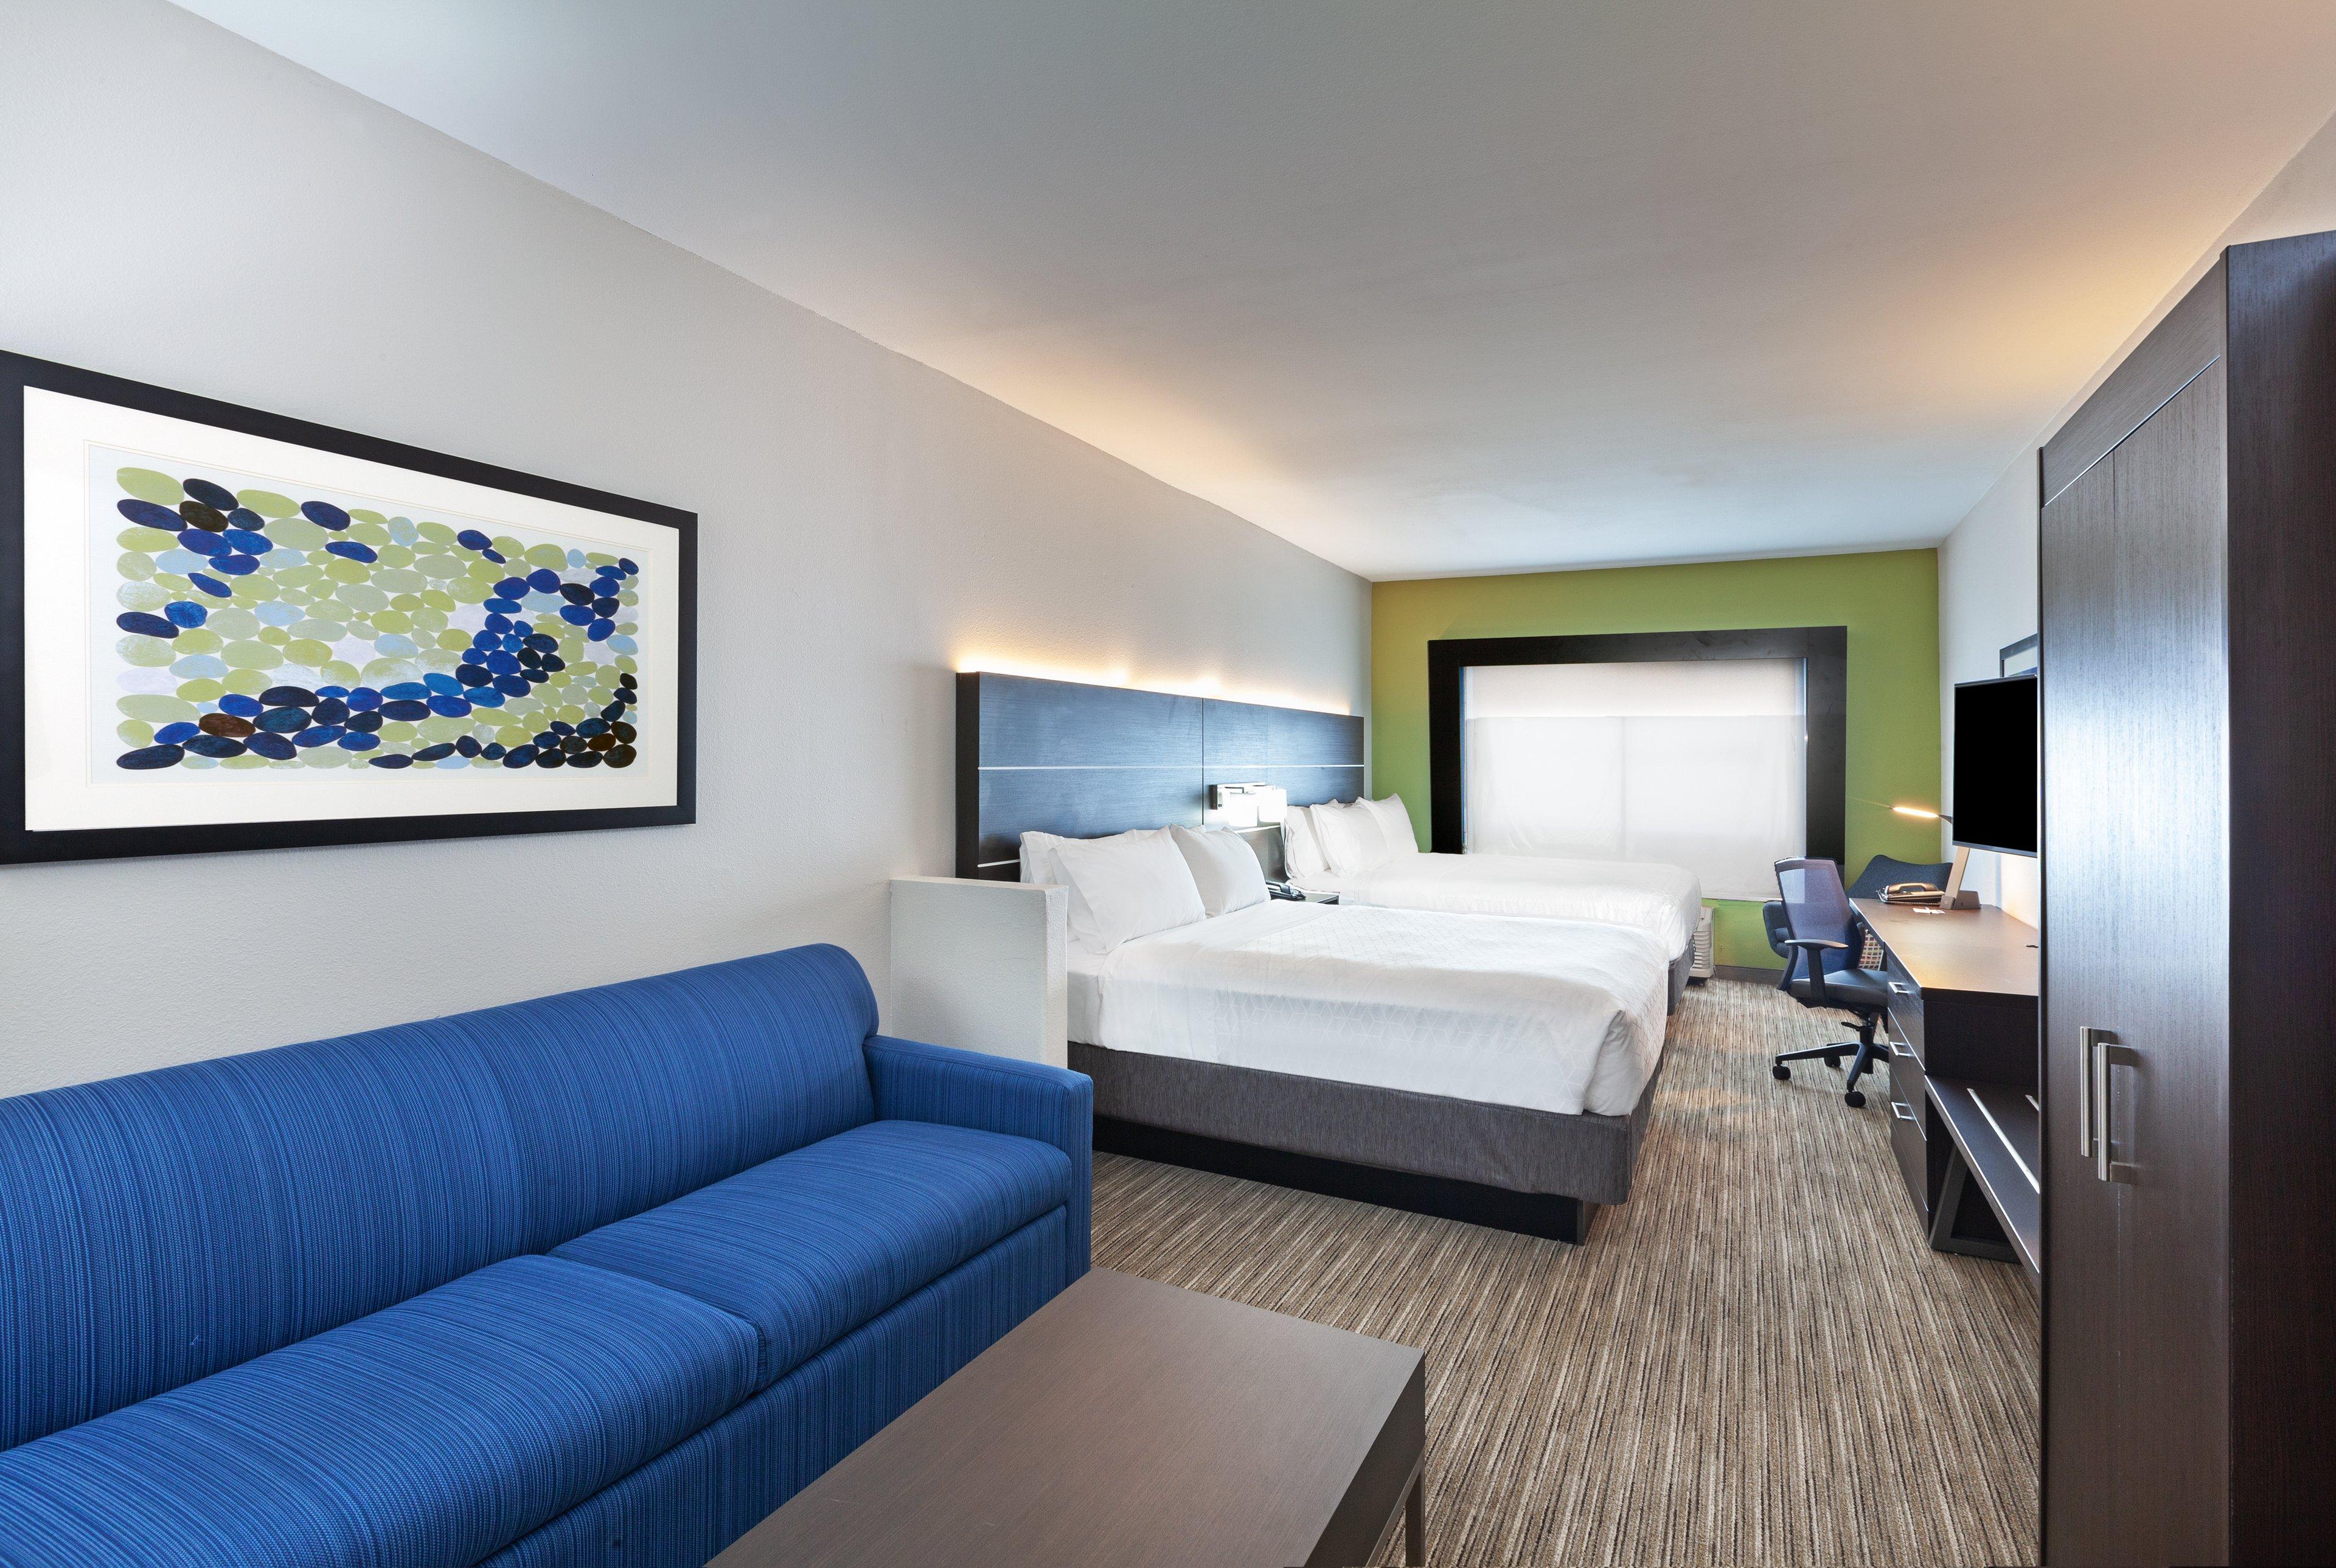 Holiday Inn Express Hotel & Suites Sealy